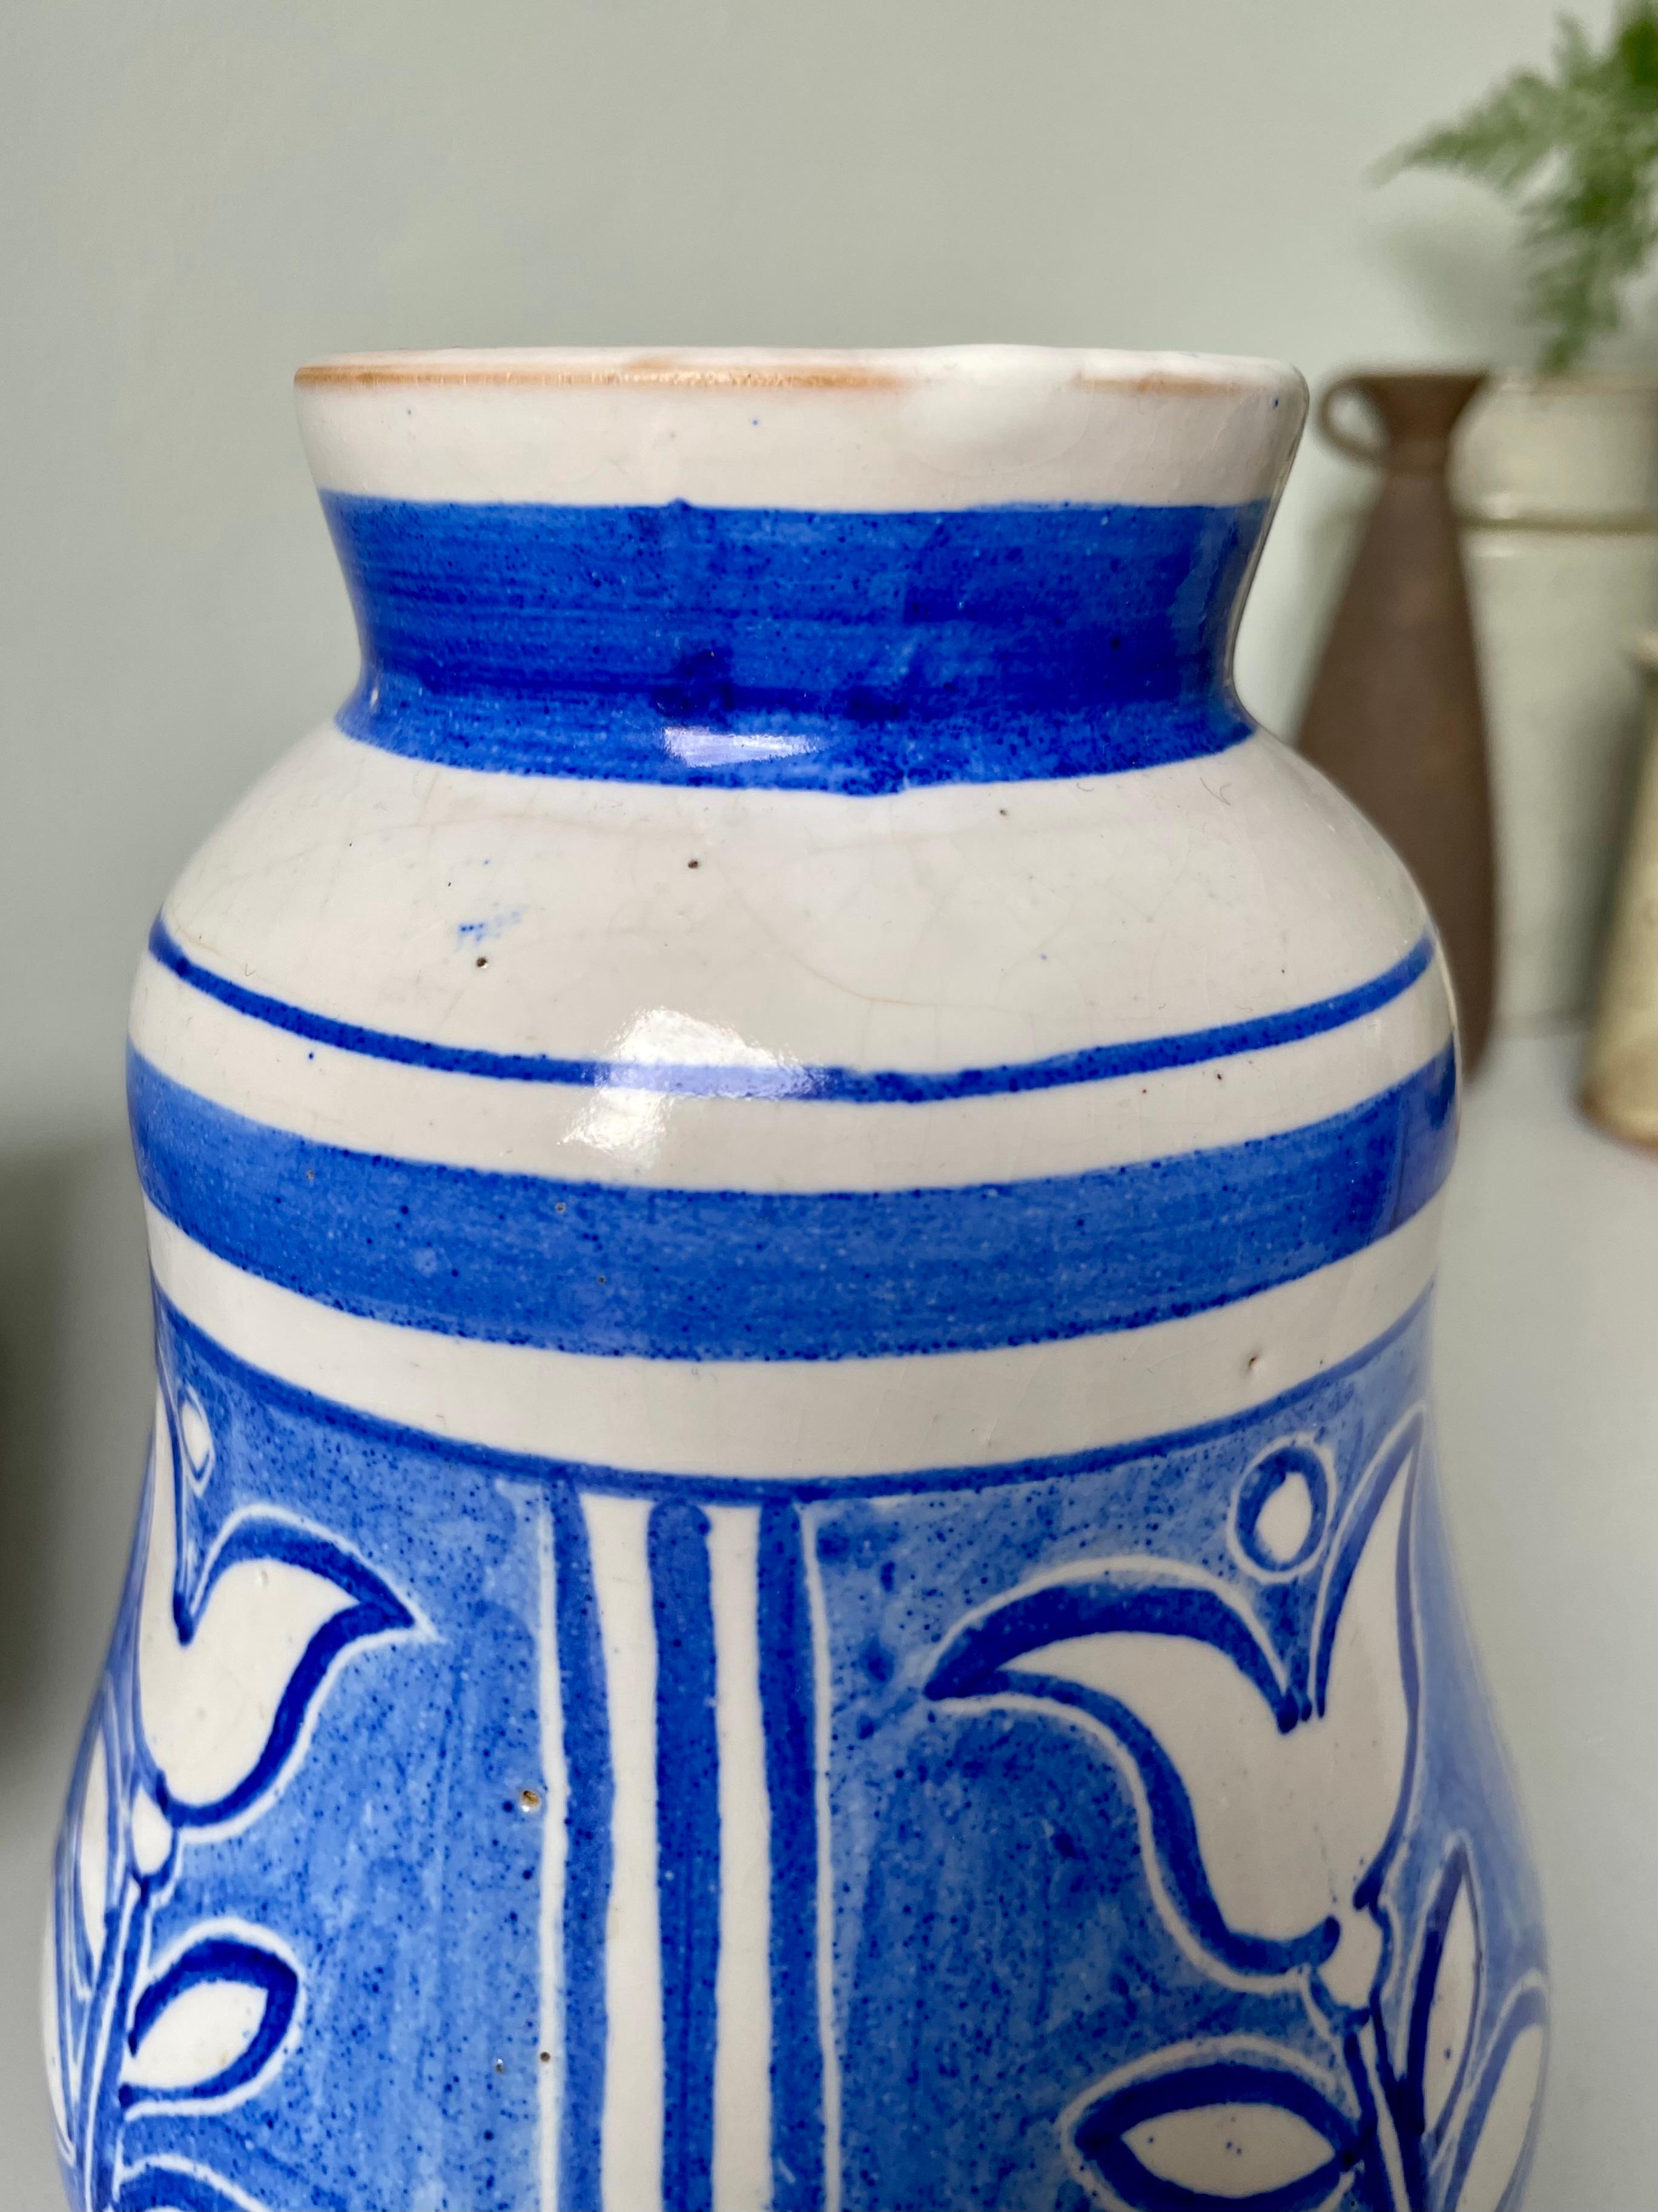 Nordic White Hand-Decorated Blue Floral Ceramic Vase, 1950s For Sale 5